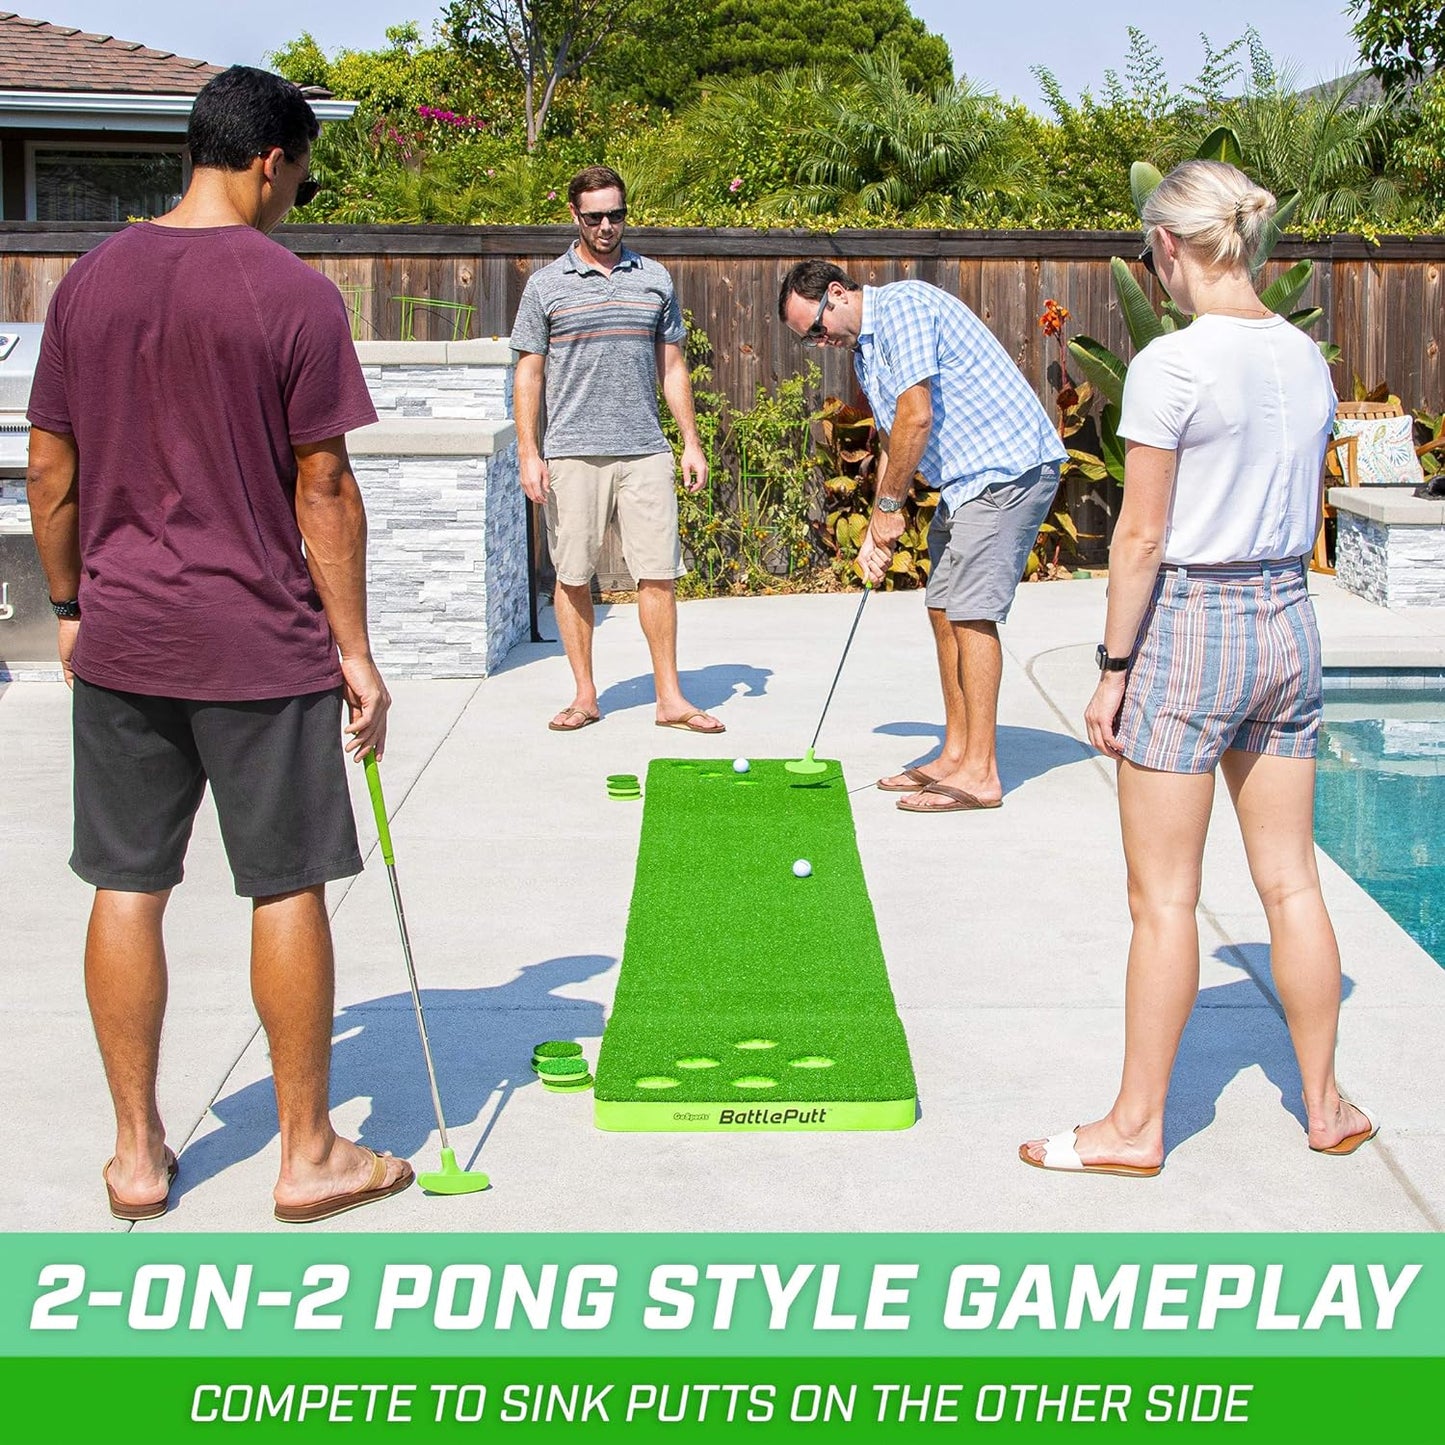 Battleputt Golf Putting Game, 2-On-2 Pong Style Play with 11 Ft Putting Green, 2 Putters and 2 Golf Balls